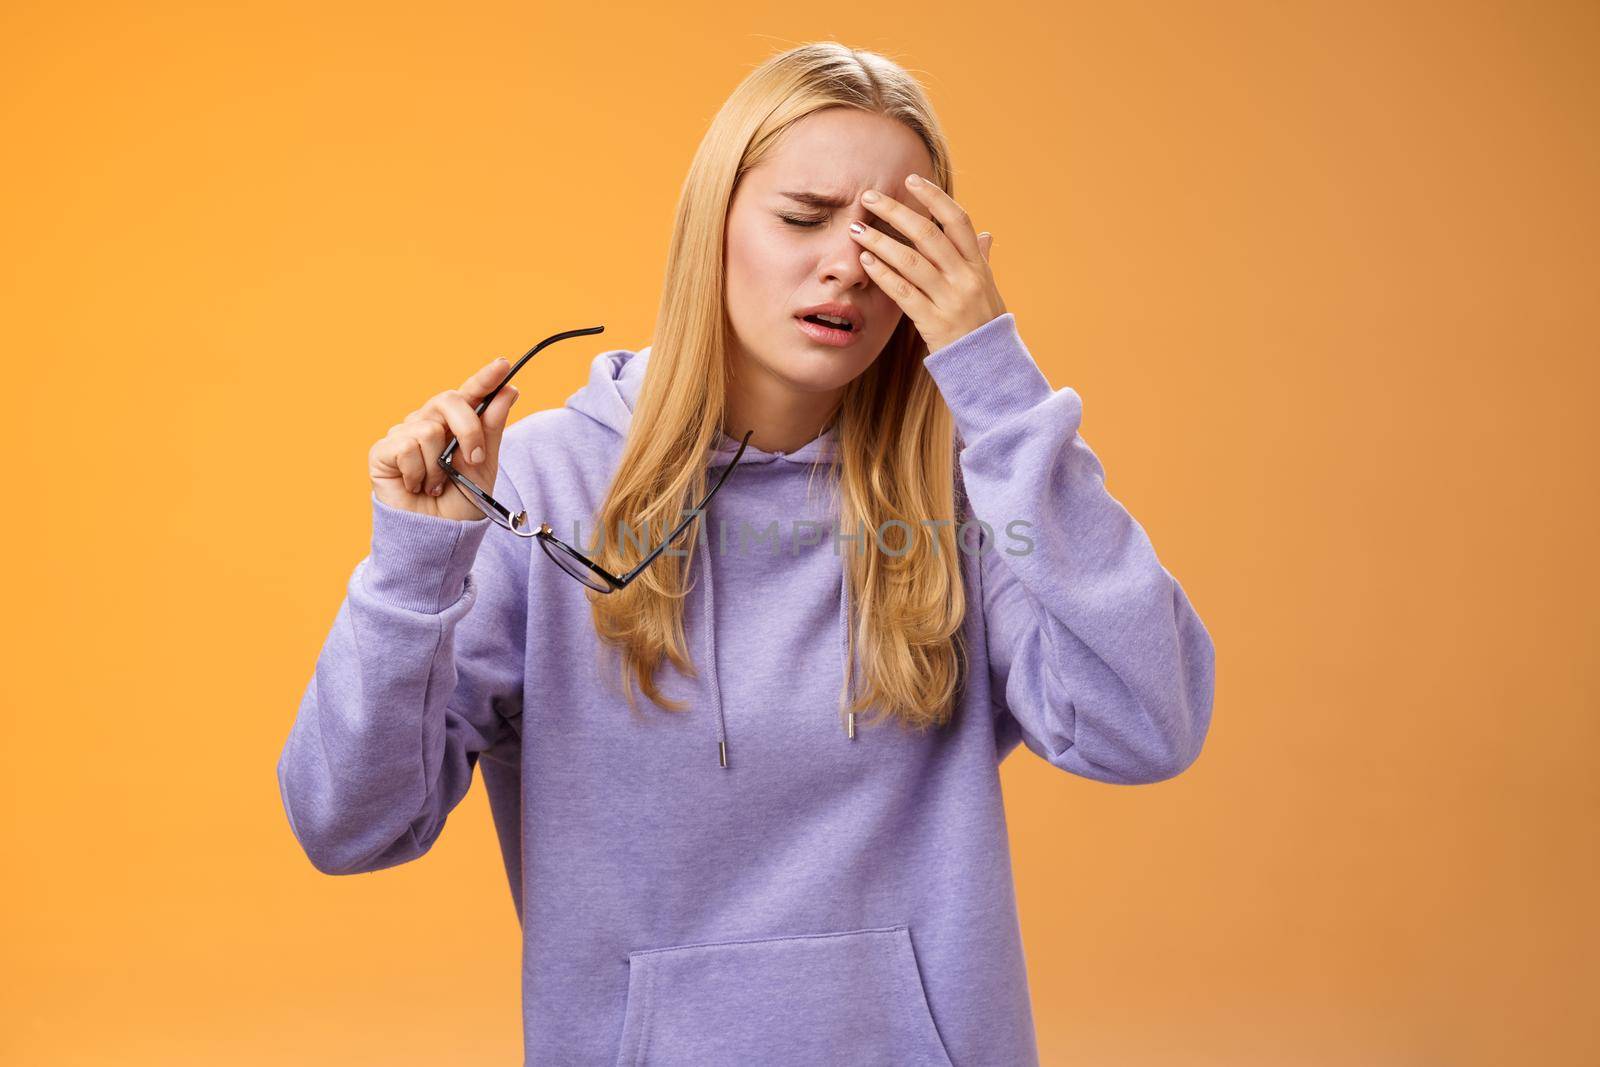 Tired dizzy cute blond girl taking off glasses touching forehead feel sick unwell suffering headache painful migraine standing bothered uncomfortable orange background in hoodie.